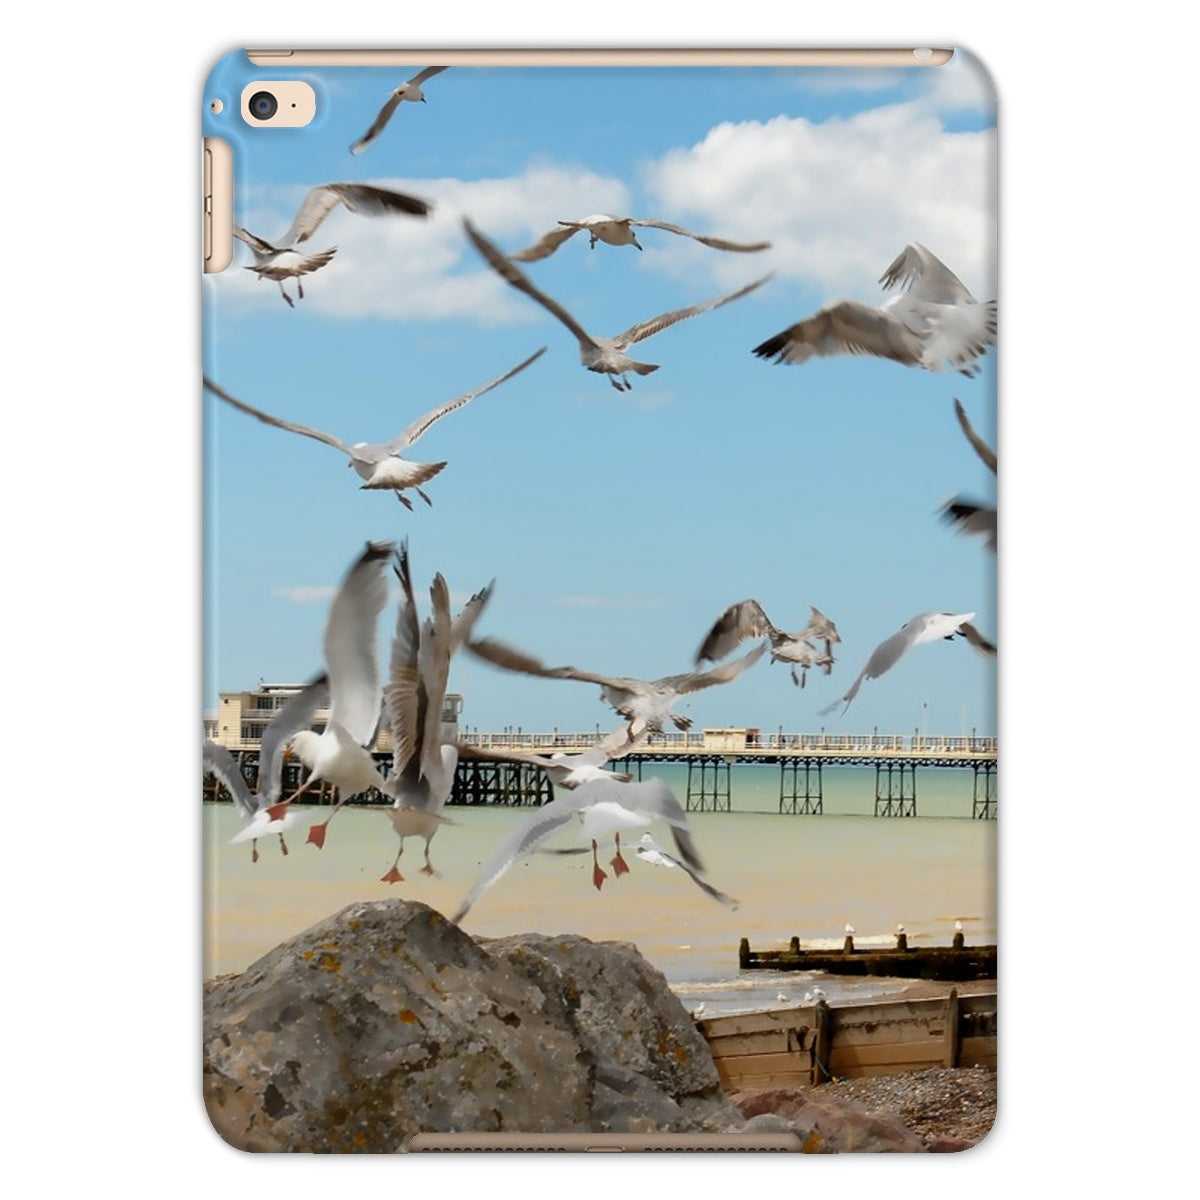 Seagulls At Feeding Time By David Sawyer Tablet Cases